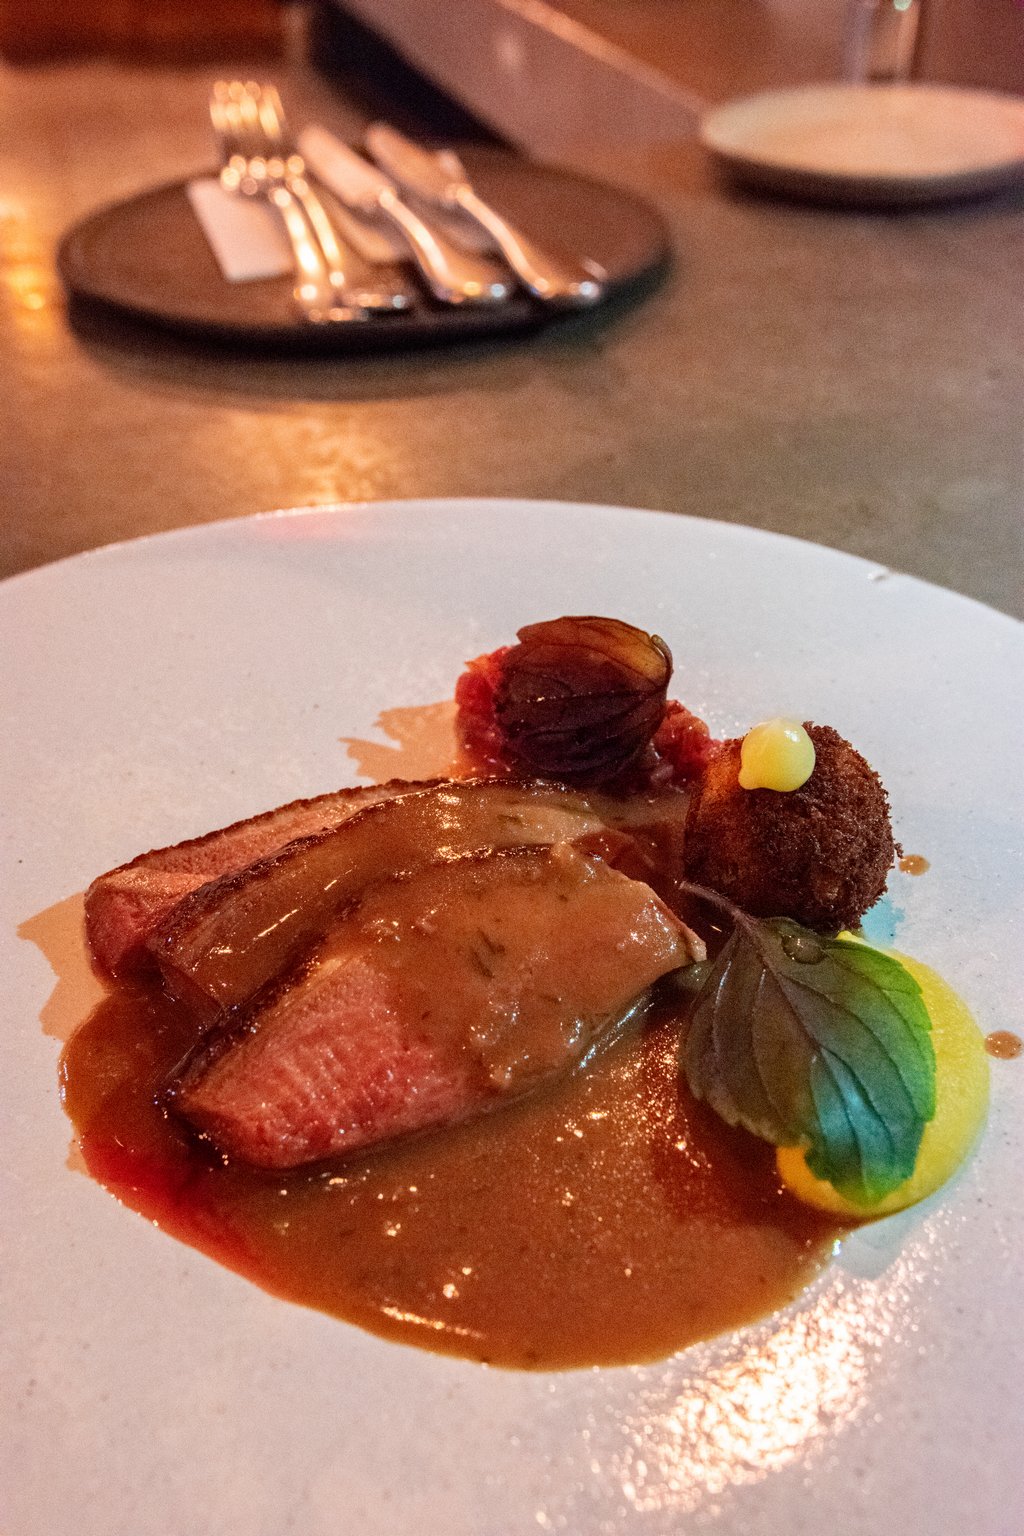 <img src="duck's breast.png" alt="locally sourced duck's breast at the OCD restaurant in Tel aviv">